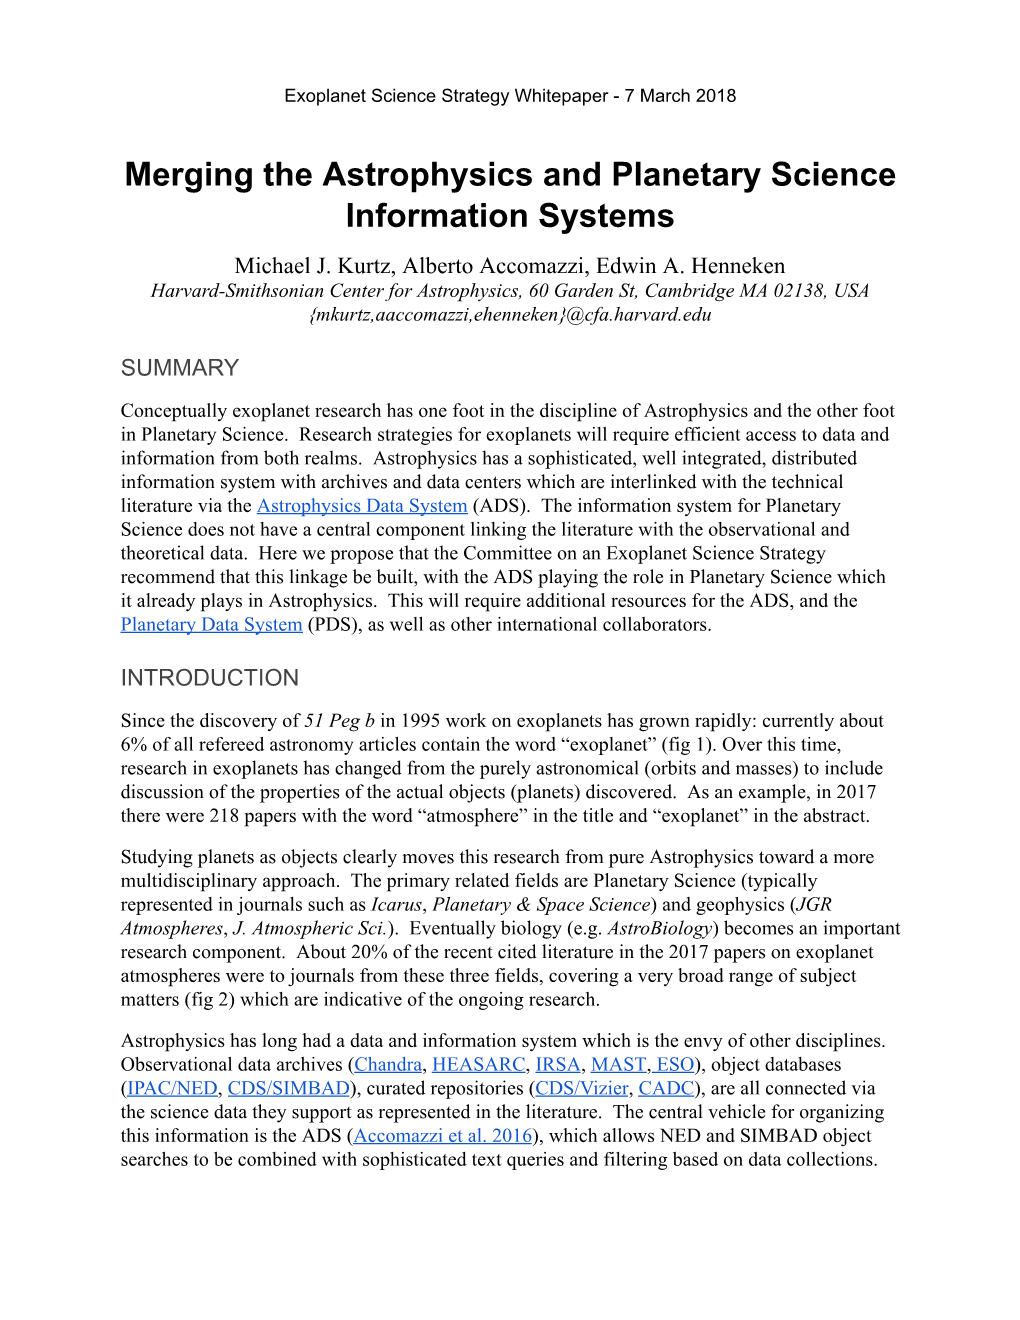 Merging the Astrophysics and Planetary Science Information Systems